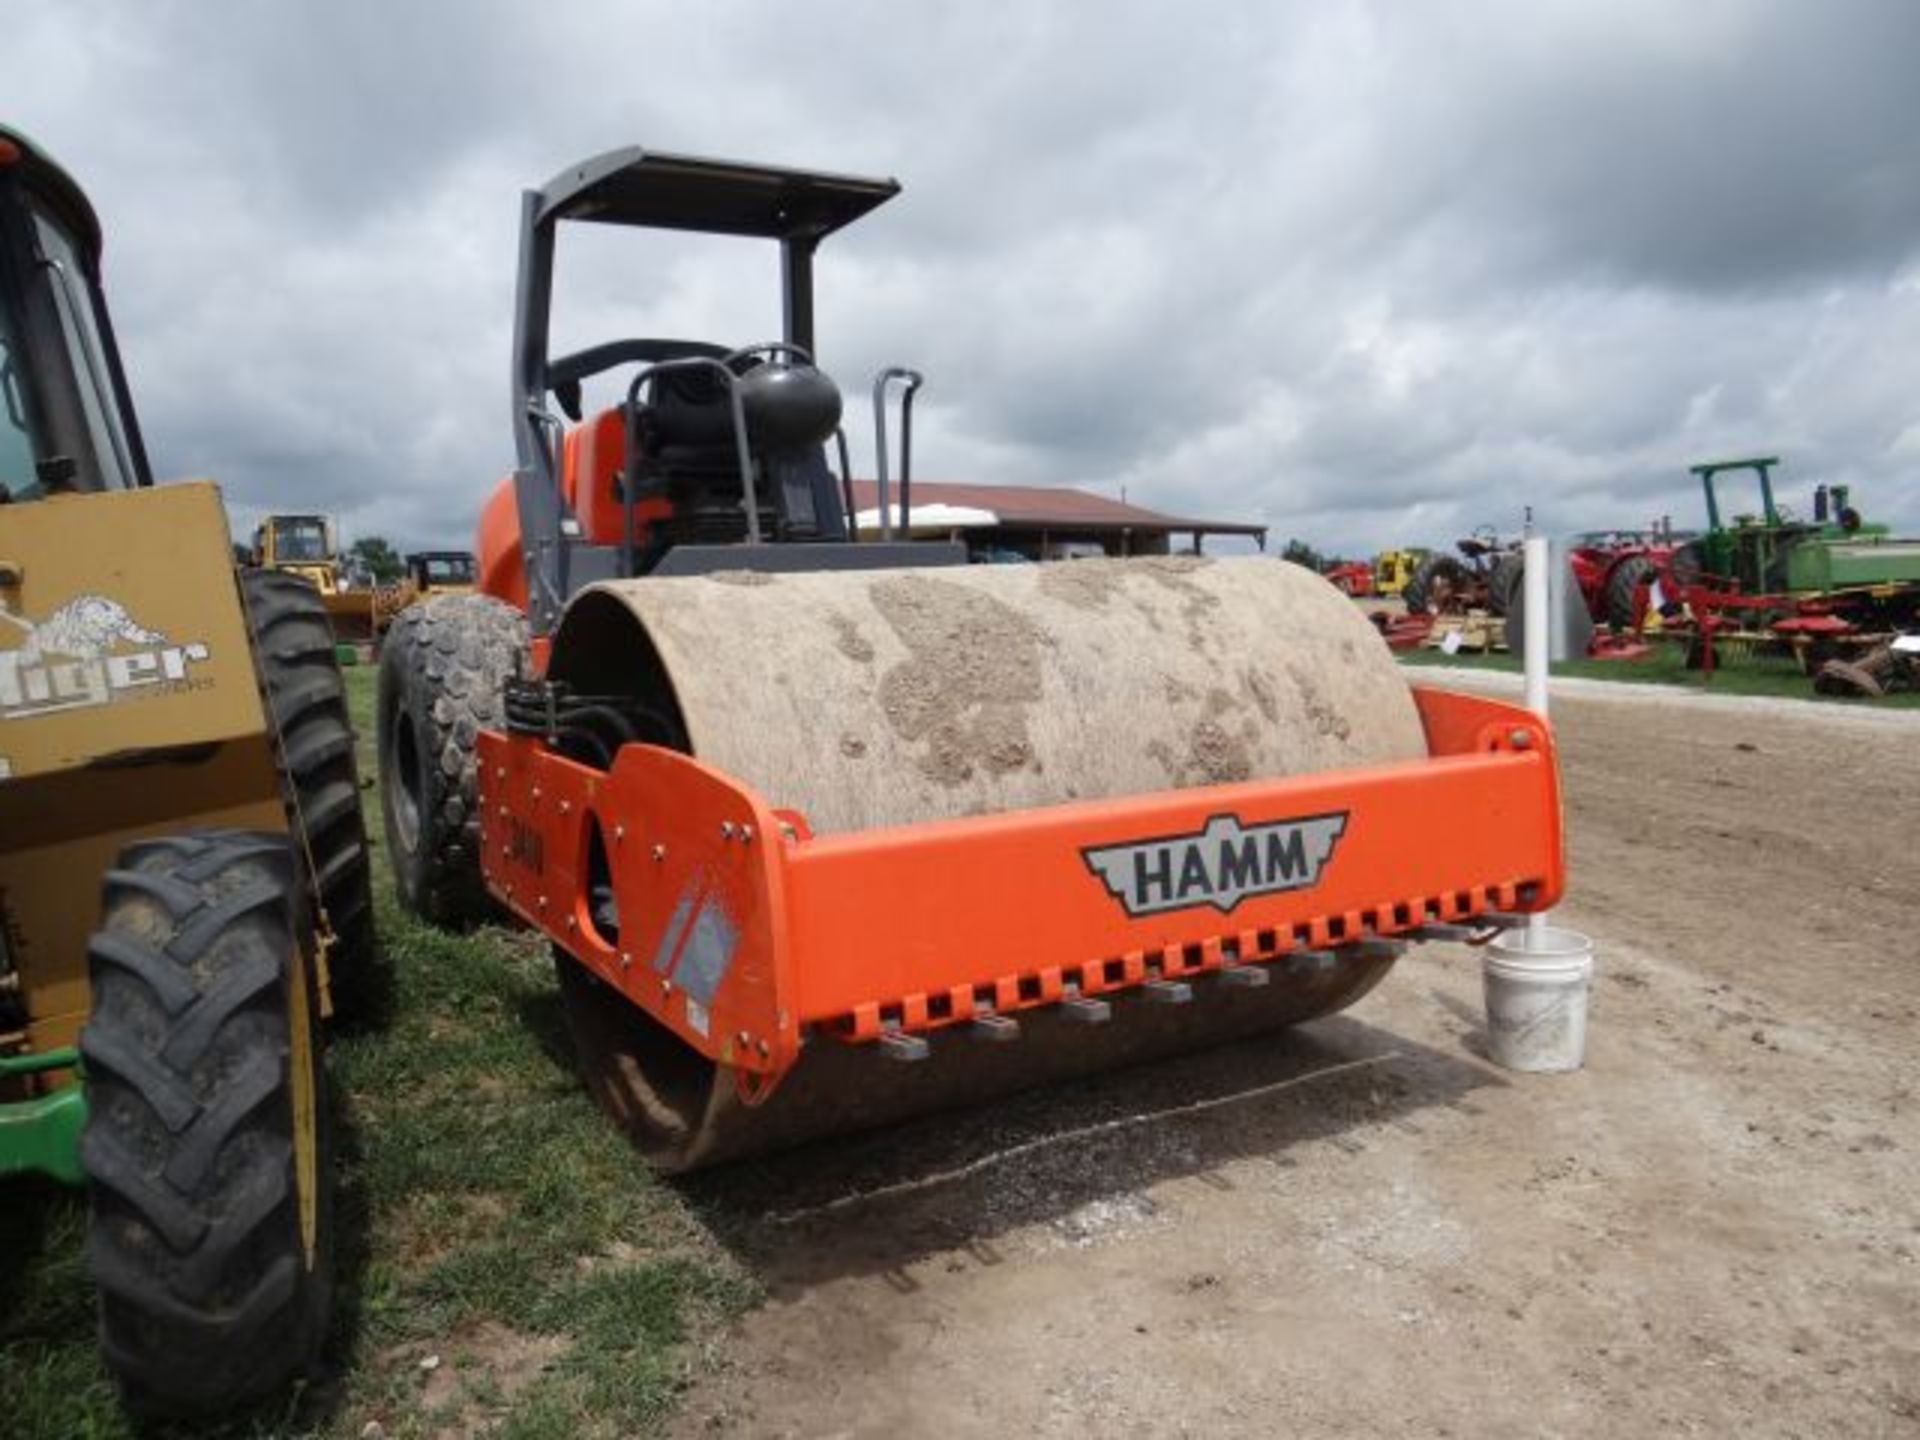 Hamm 3410 Roller, 2013 84" Roller, 752 hrs, 12T Pad Foot, Clam Shell Kit Available, Manuals in the - Image 2 of 3